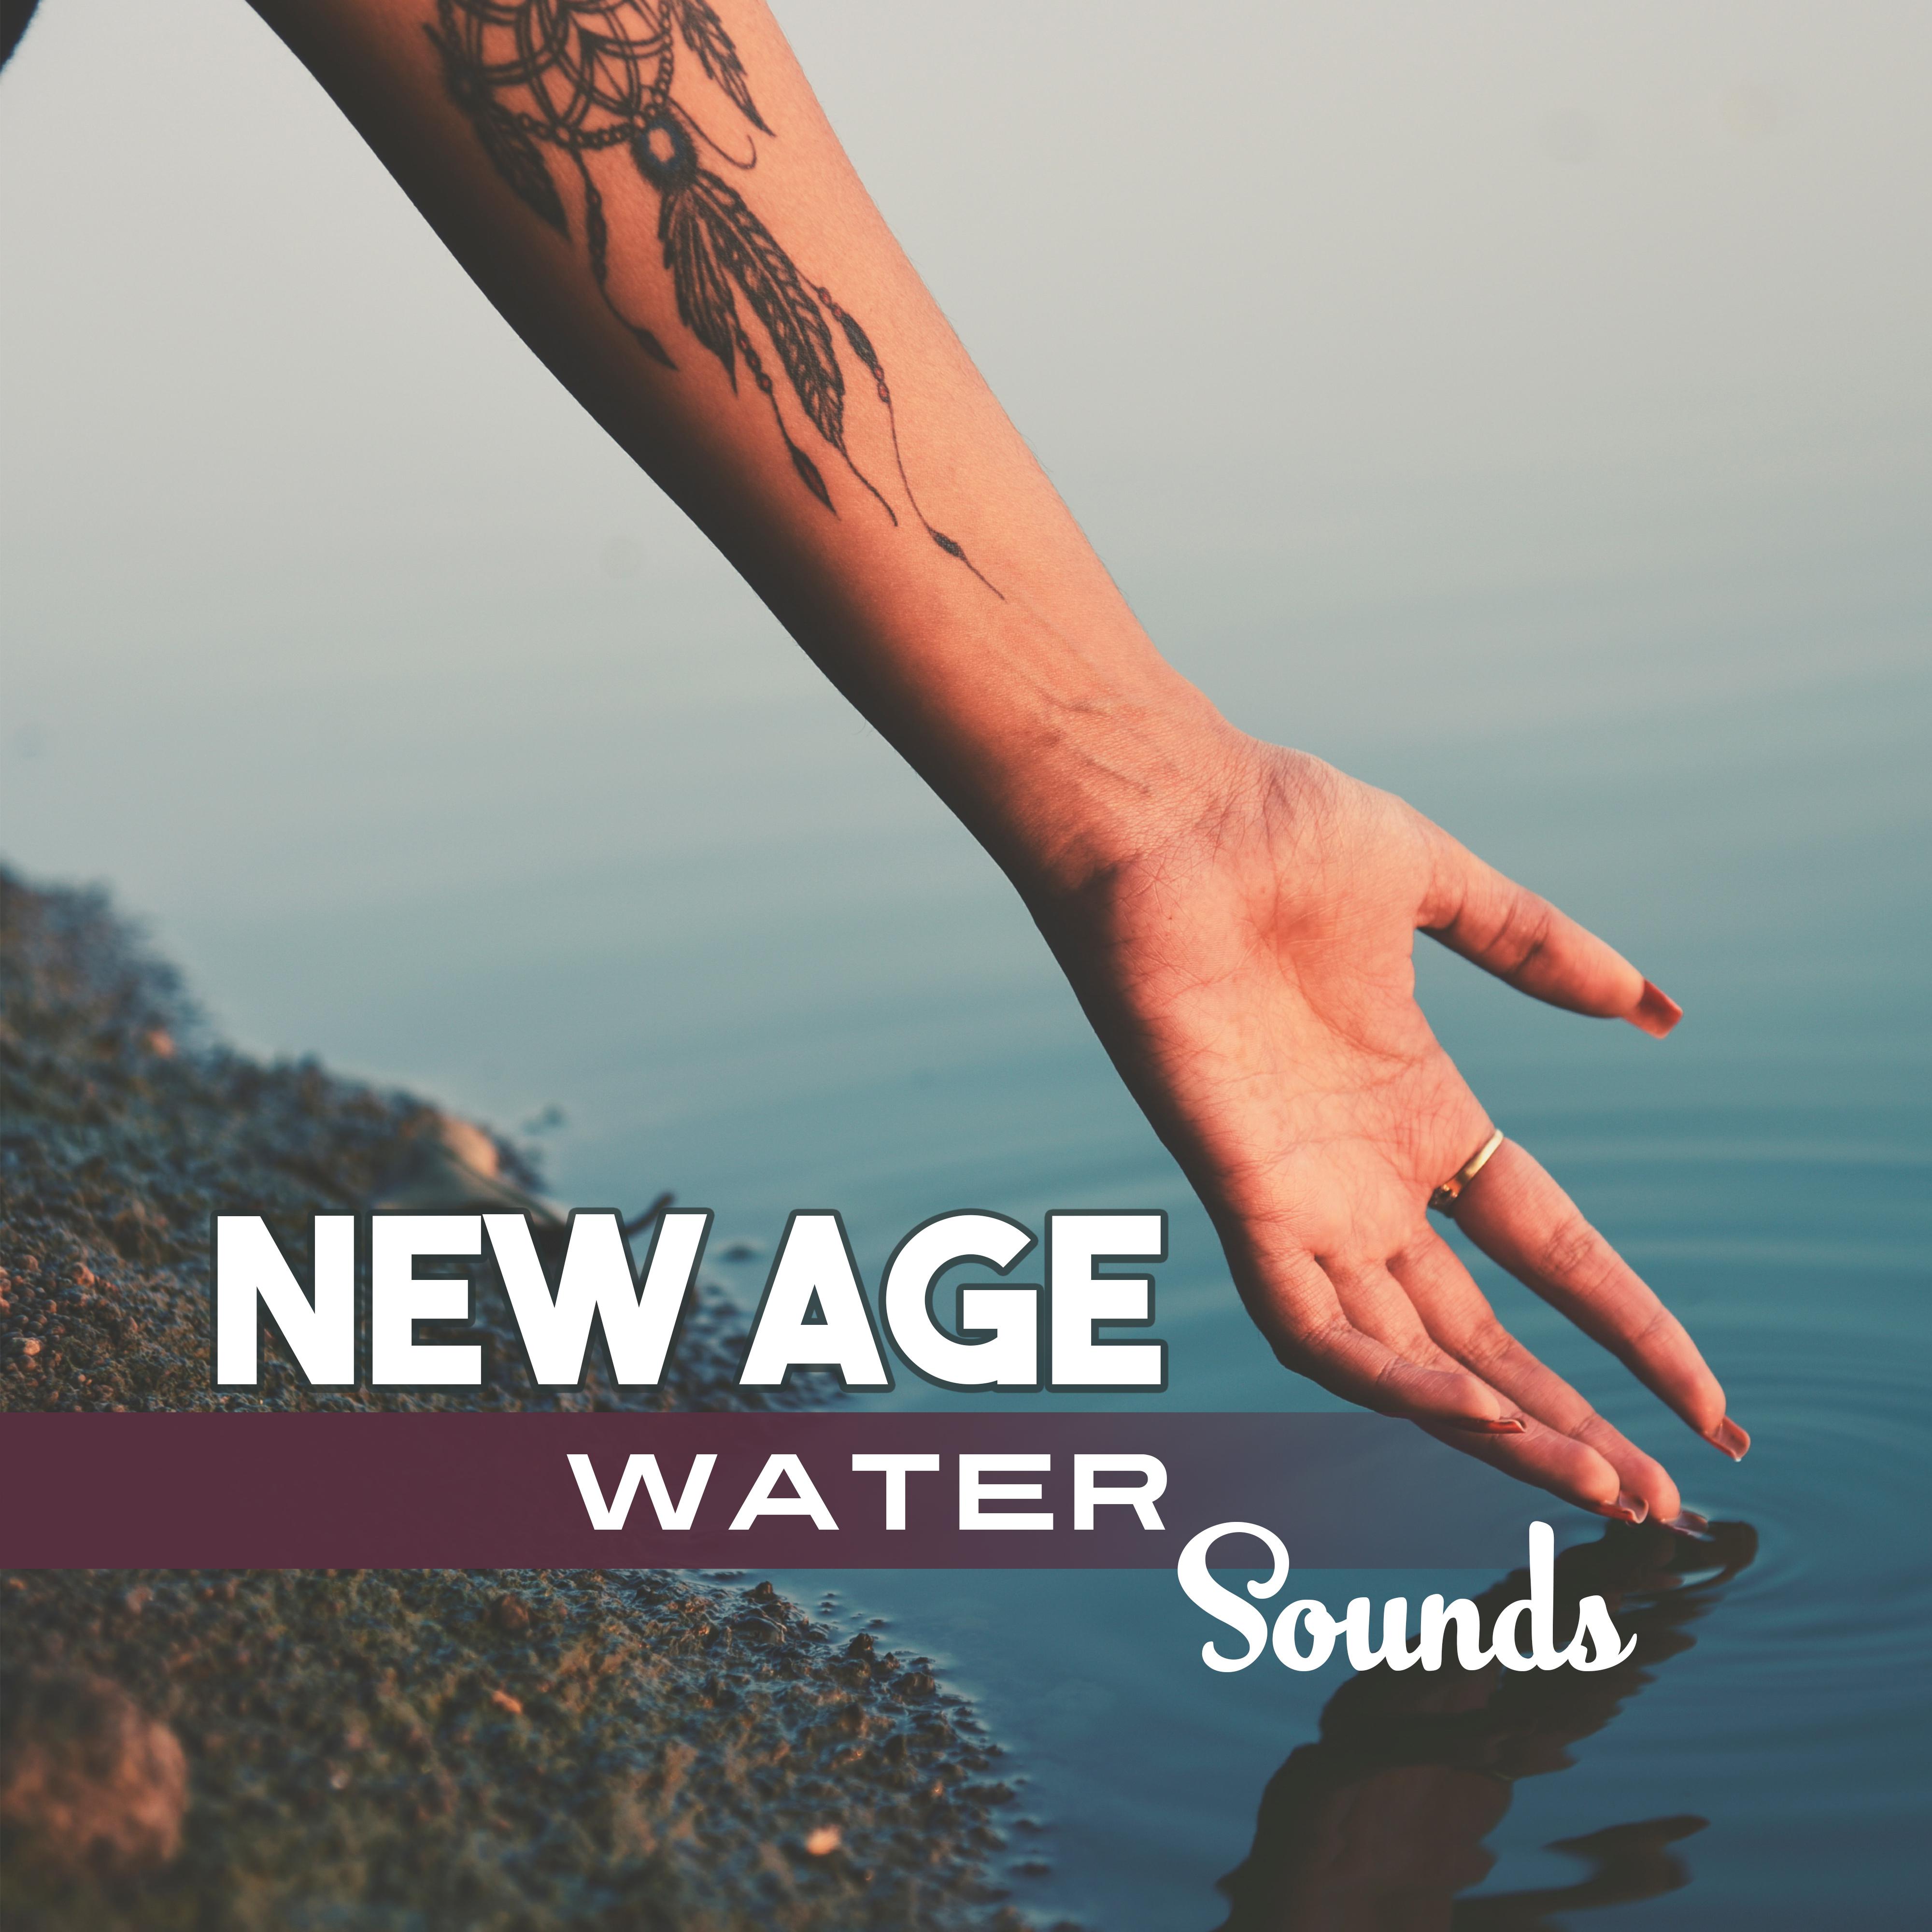 New Age Water Sounds – Relaxing Water Waves, Healing Therapy, Soft Nature